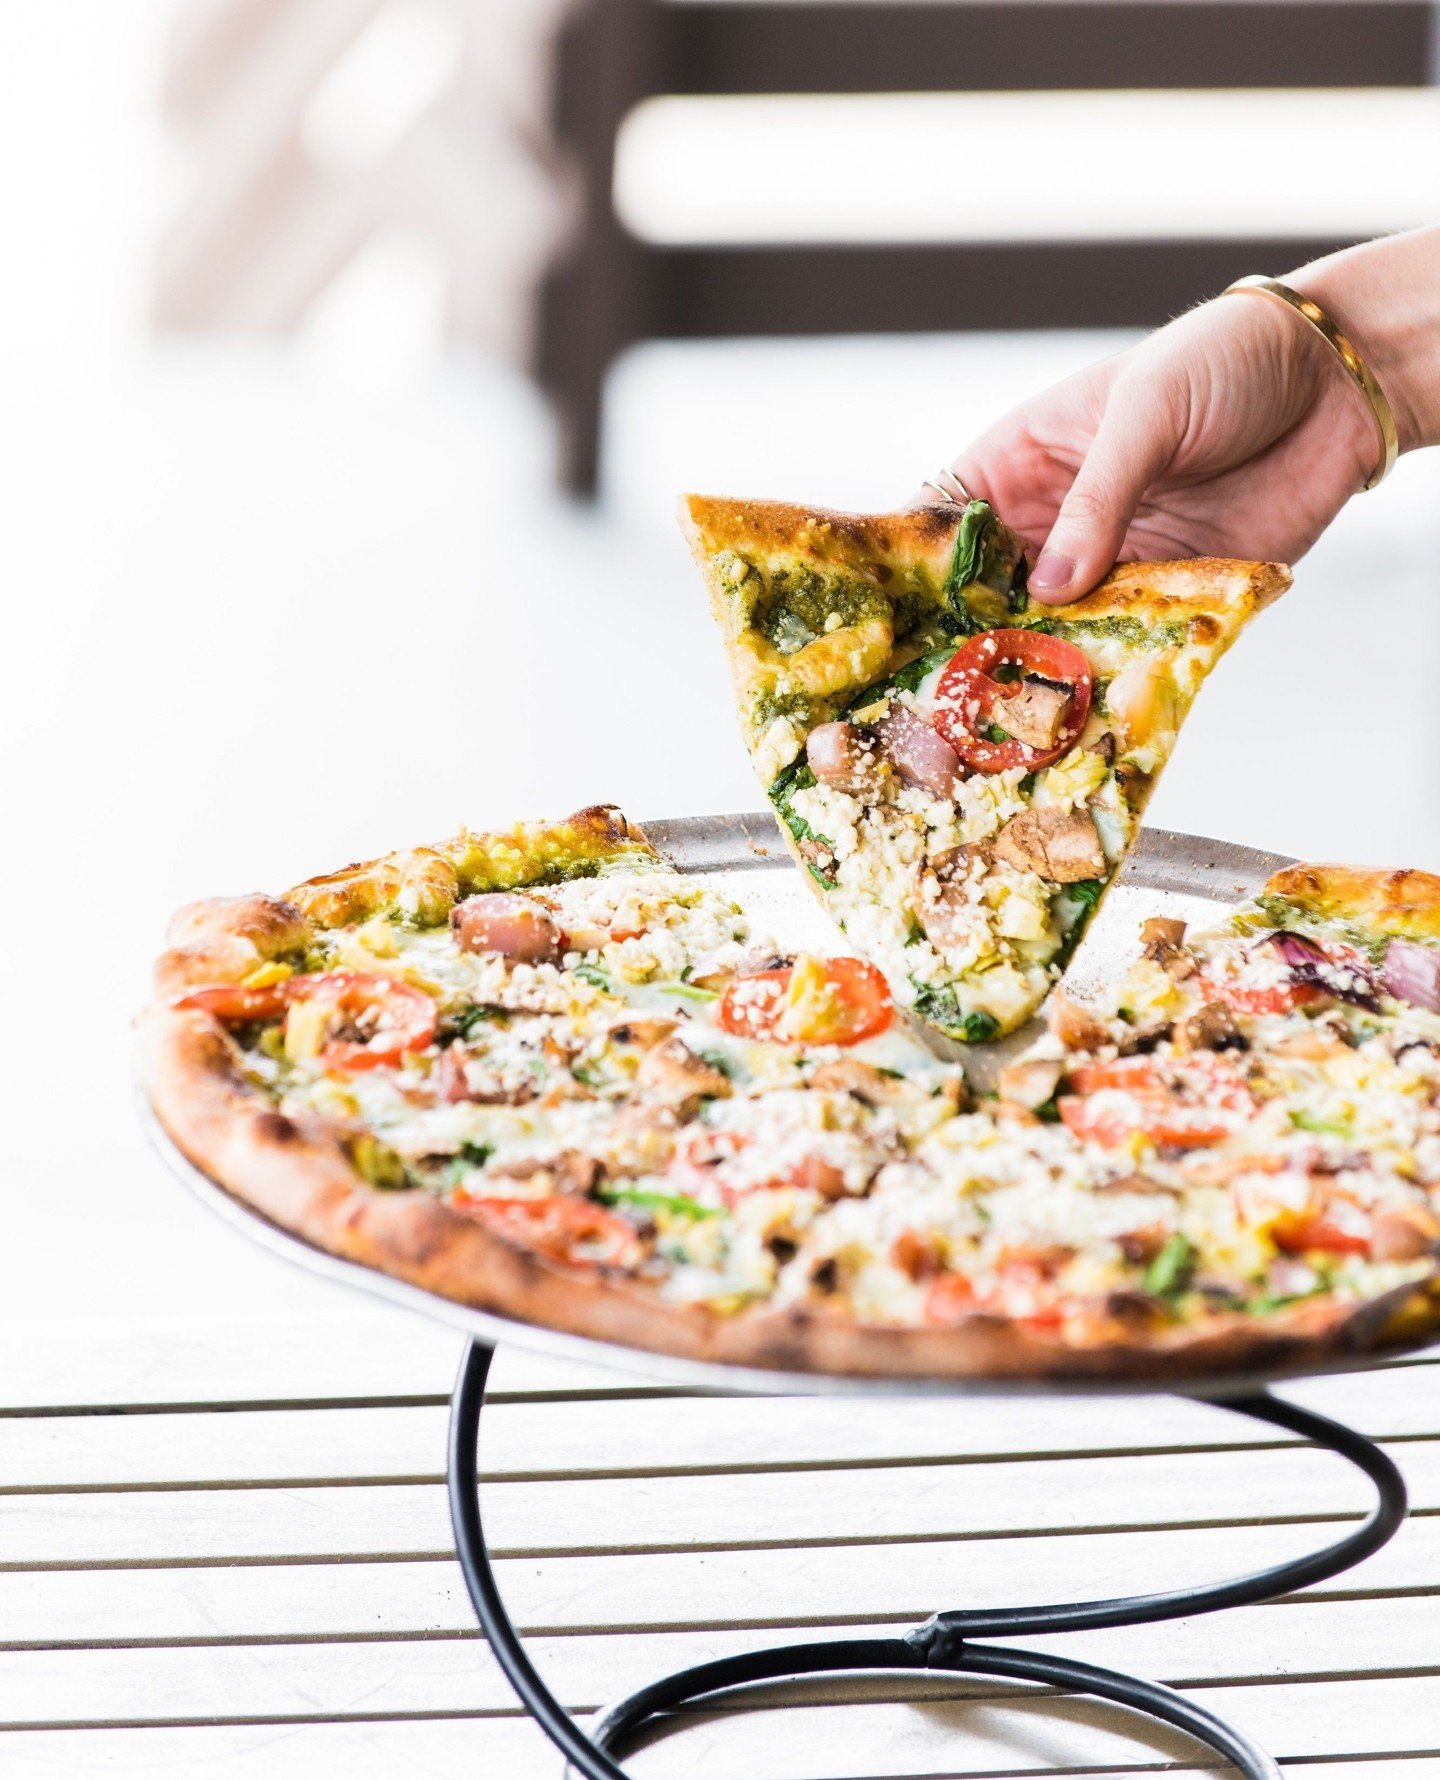 It&rsquo;s Friday&hellip; you&rsquo;ve EARNED this Slice! 😉🍕 Slice&rsquo;s Veggie Pesto Pizza is made with ALL the good stuff- pesto, spinach, grilled red onions, mushrooms, tomatoes, feta cheese and artichoke hearts. ⁠
⁠
Start your weekend RIGHT w